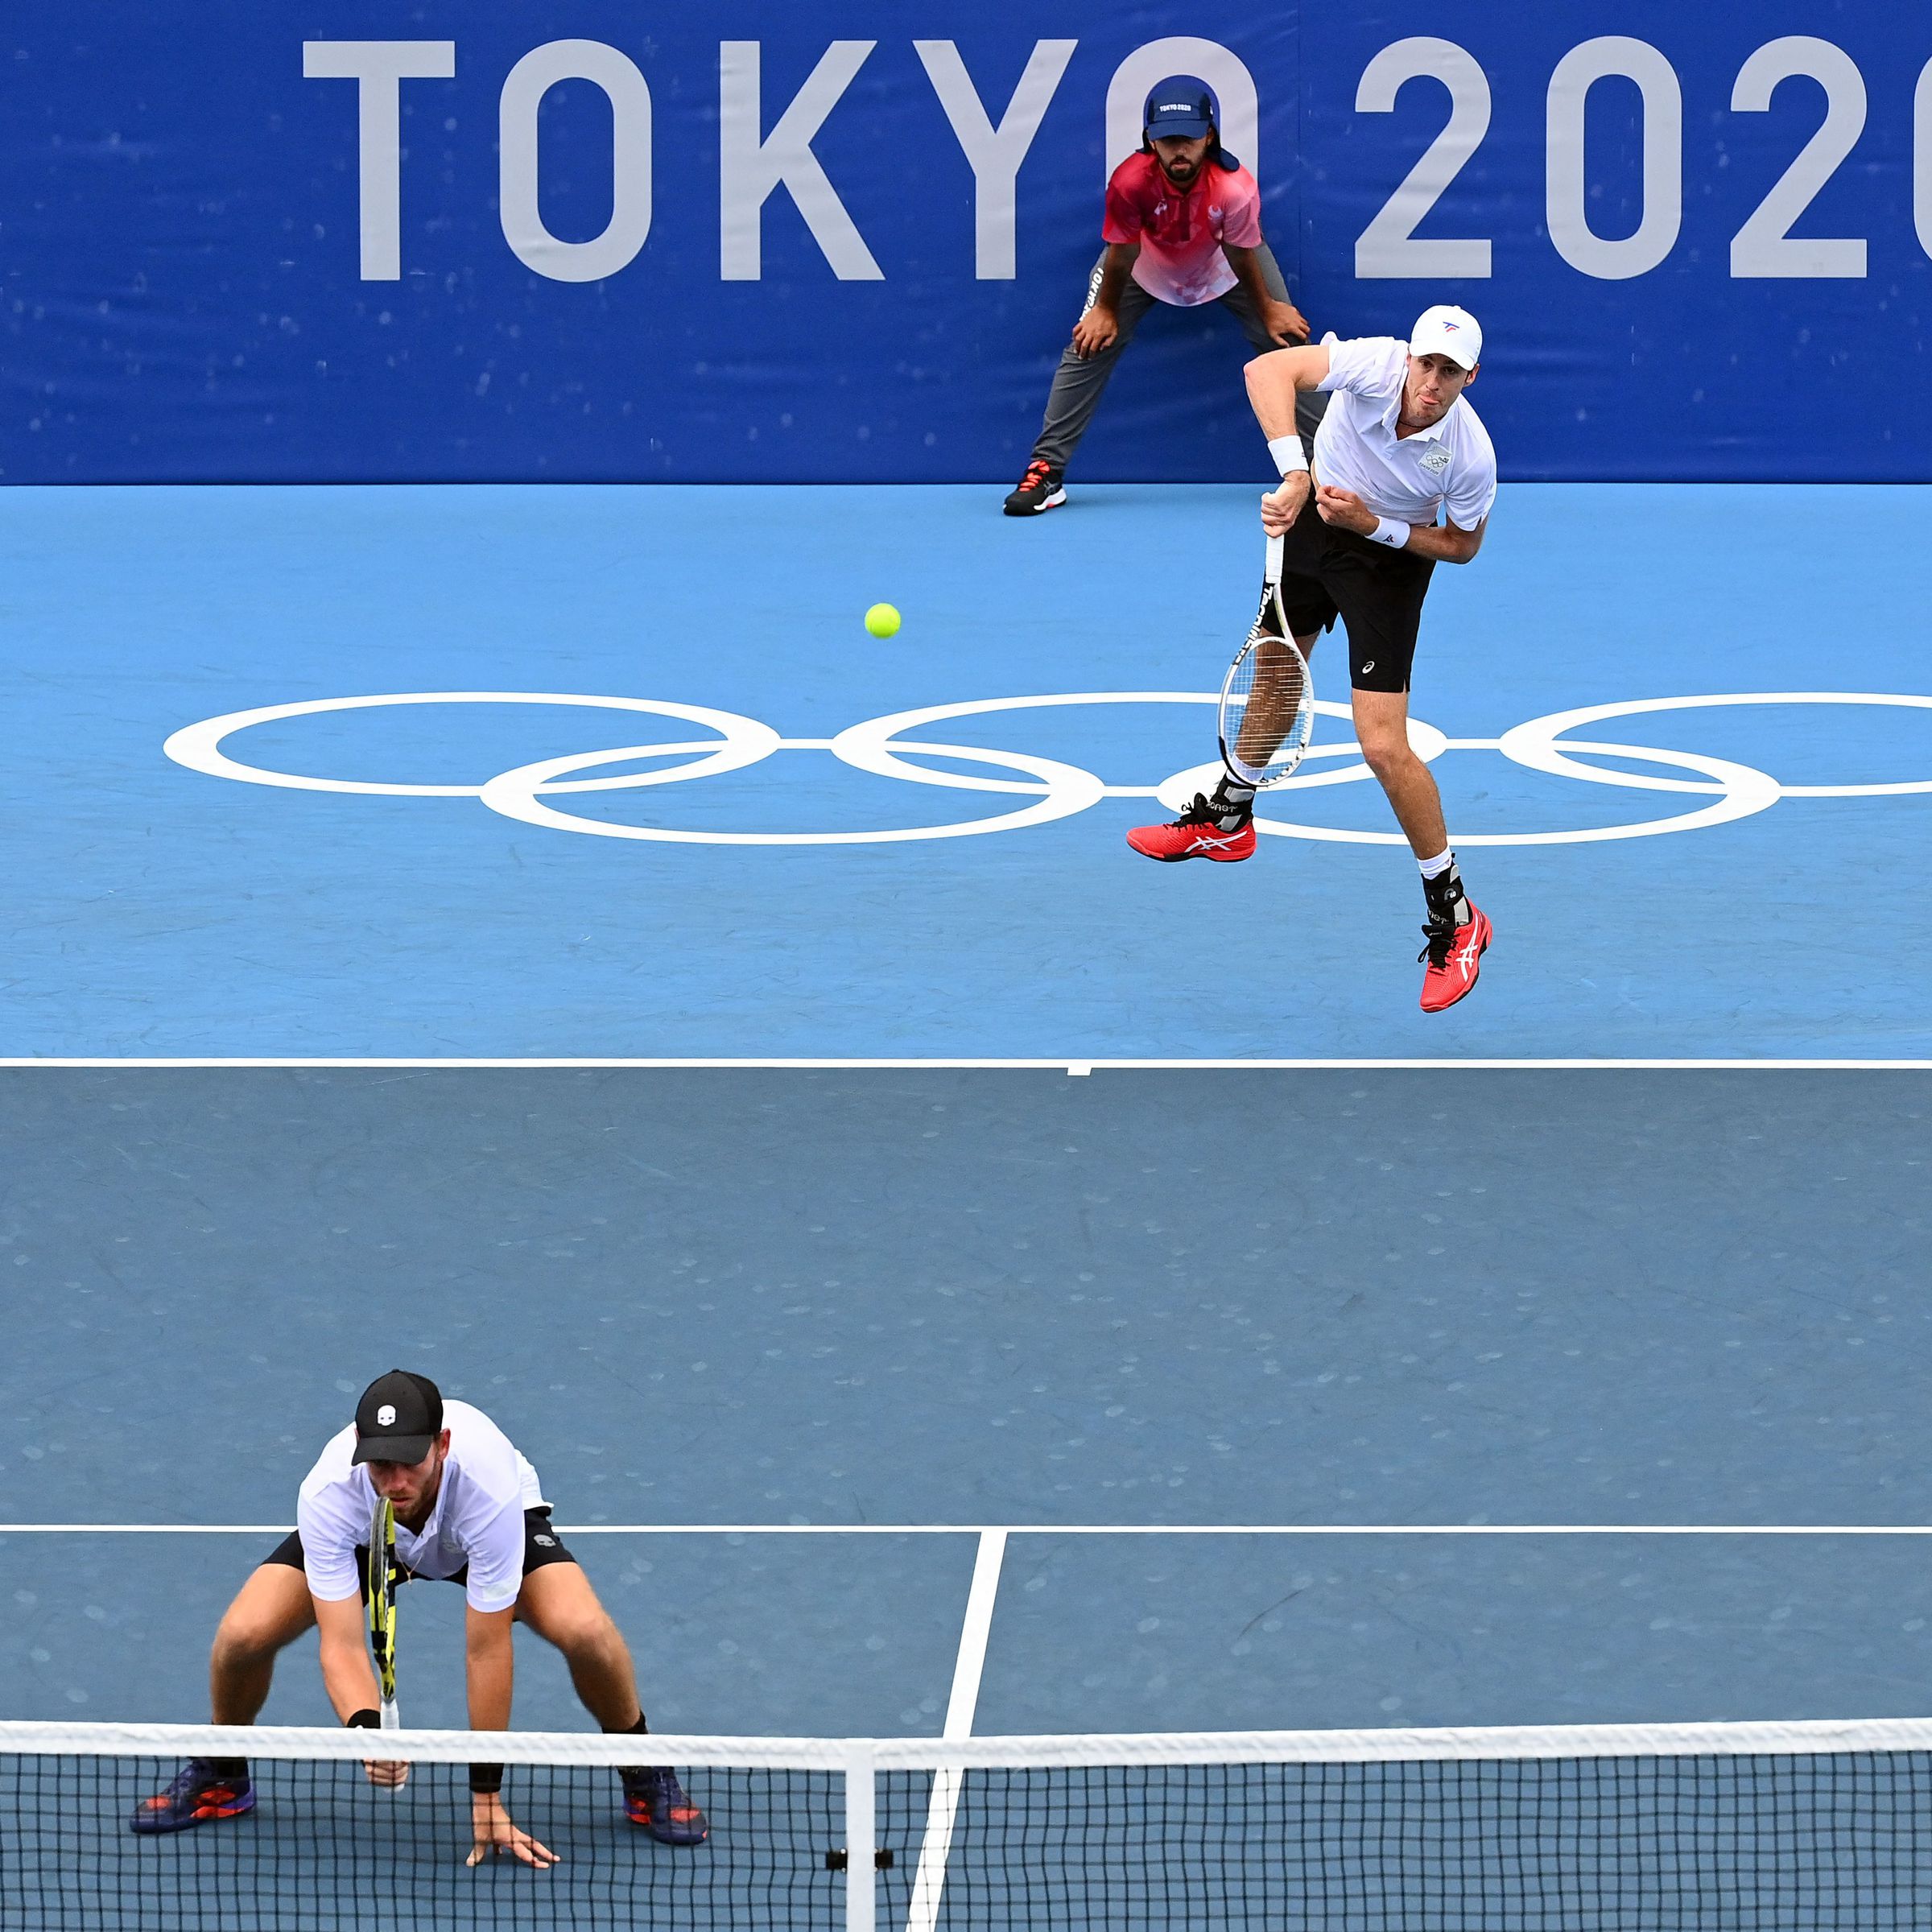 A man leaps to hit a tennis ball on an Olympic court. Another man is crouching on the court in front of him.